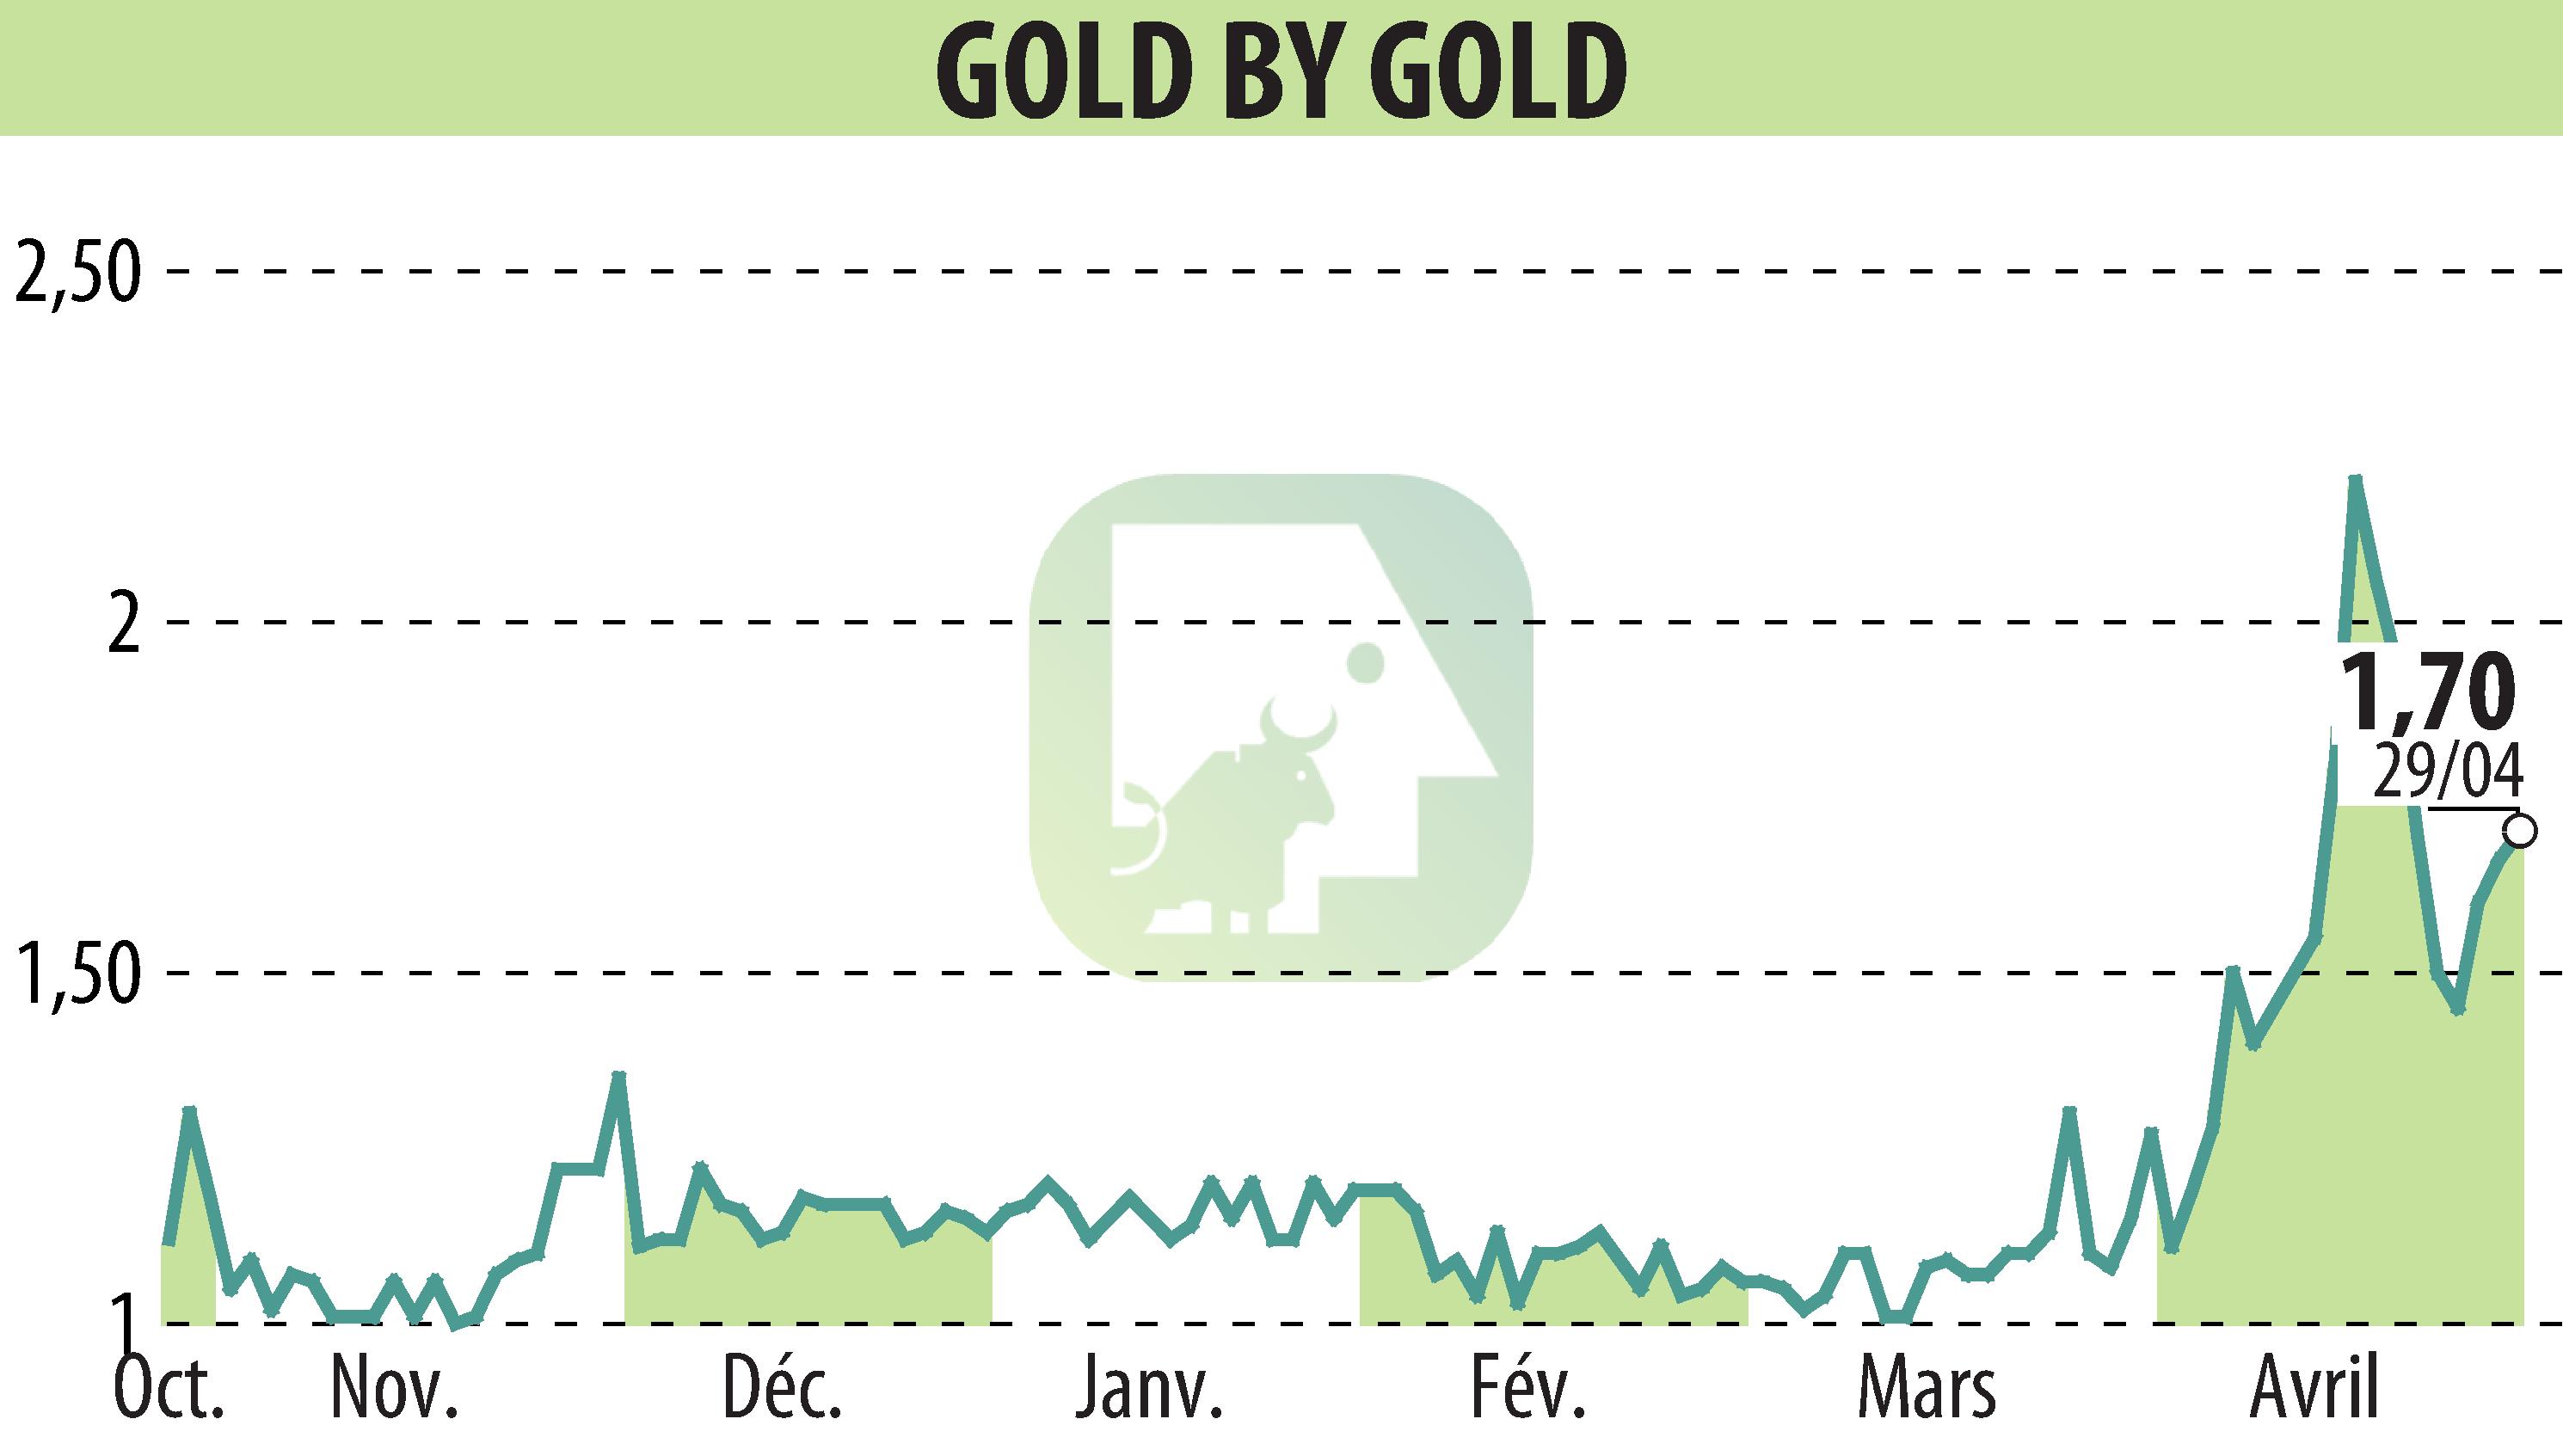 Stock price chart of GOLD BY GOLD (EPA:ALGLD) showing fluctuations.